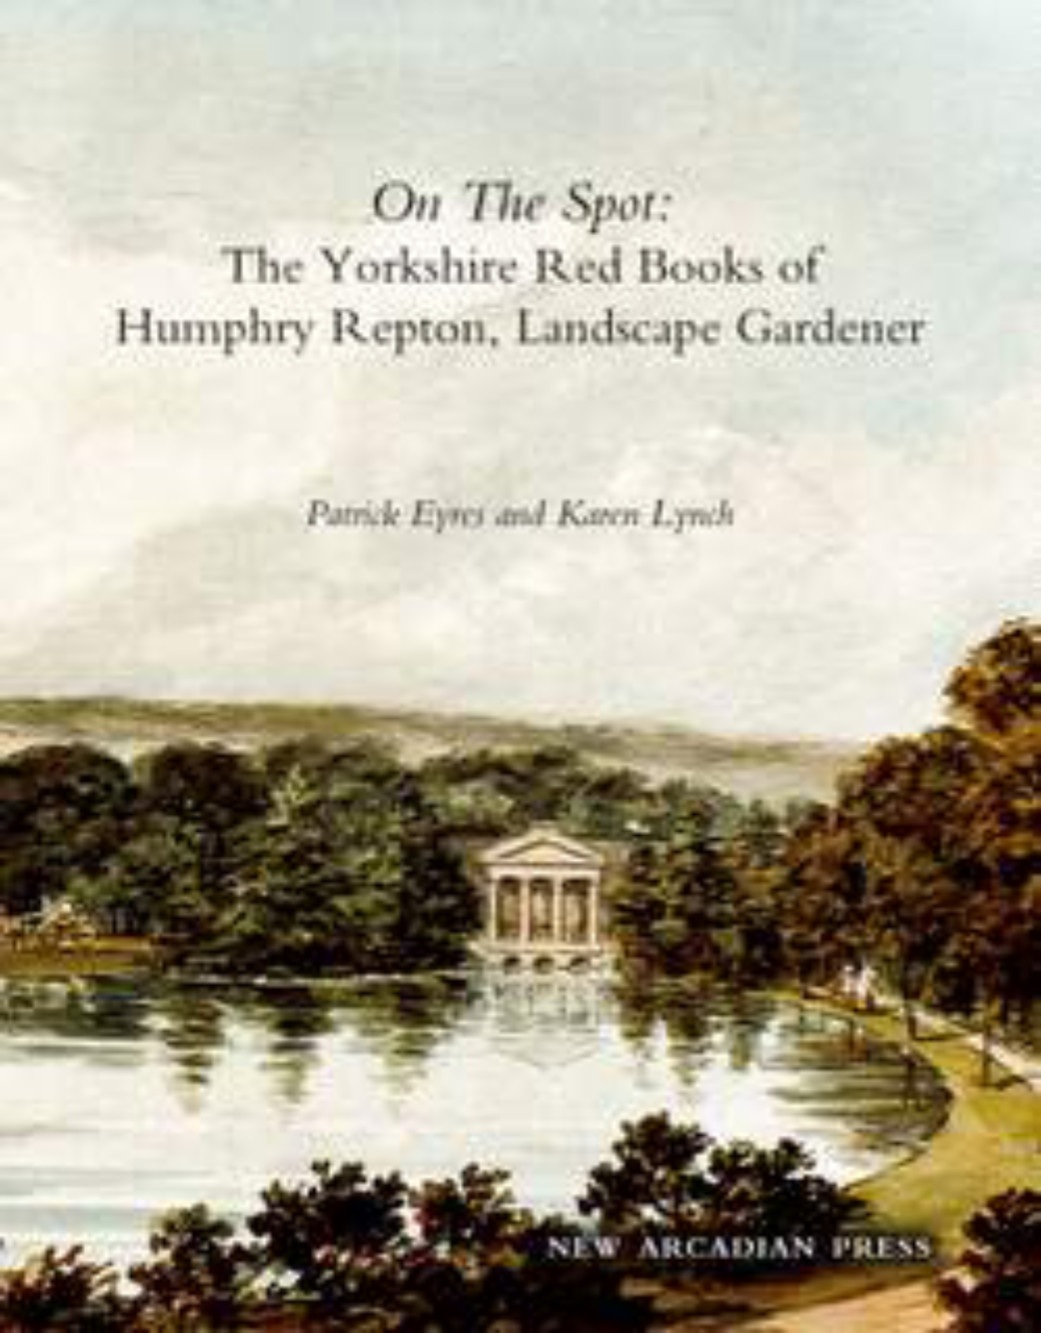 On the Spot: The Yorkshire Red Books of Humphry Repton Landscape Gardener. Patrick Eyres and Karen Lynch